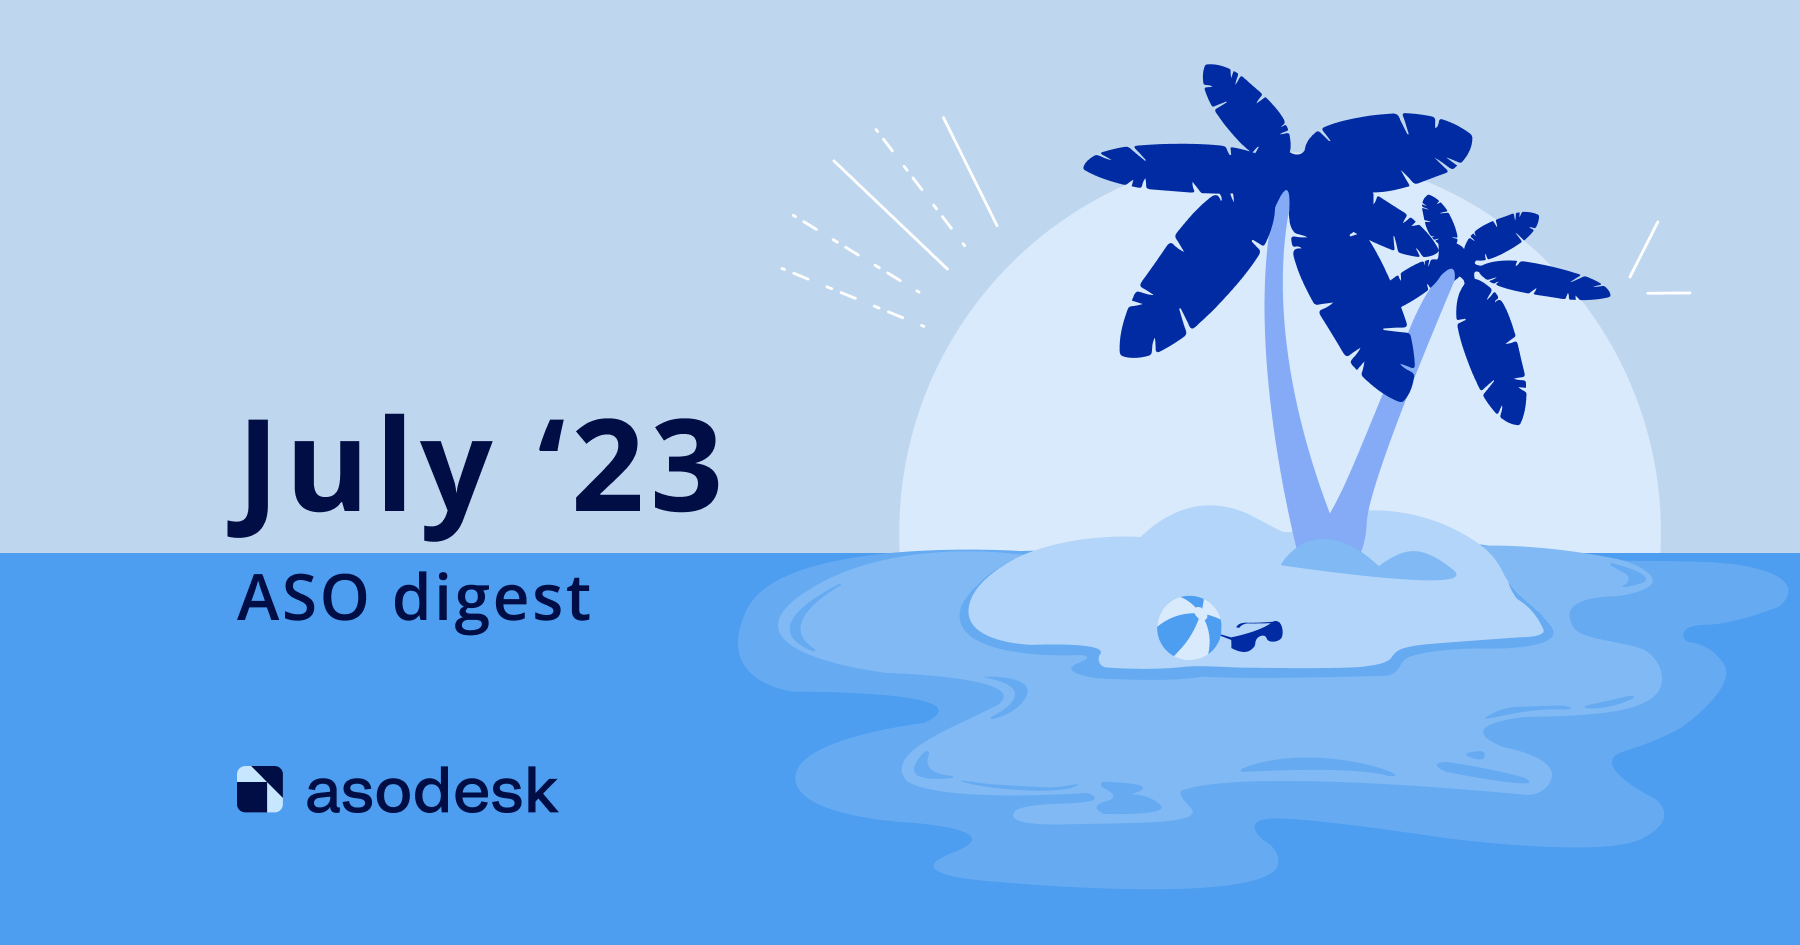 Read App Store and Google Play news for July 2023 in Asodesk digest